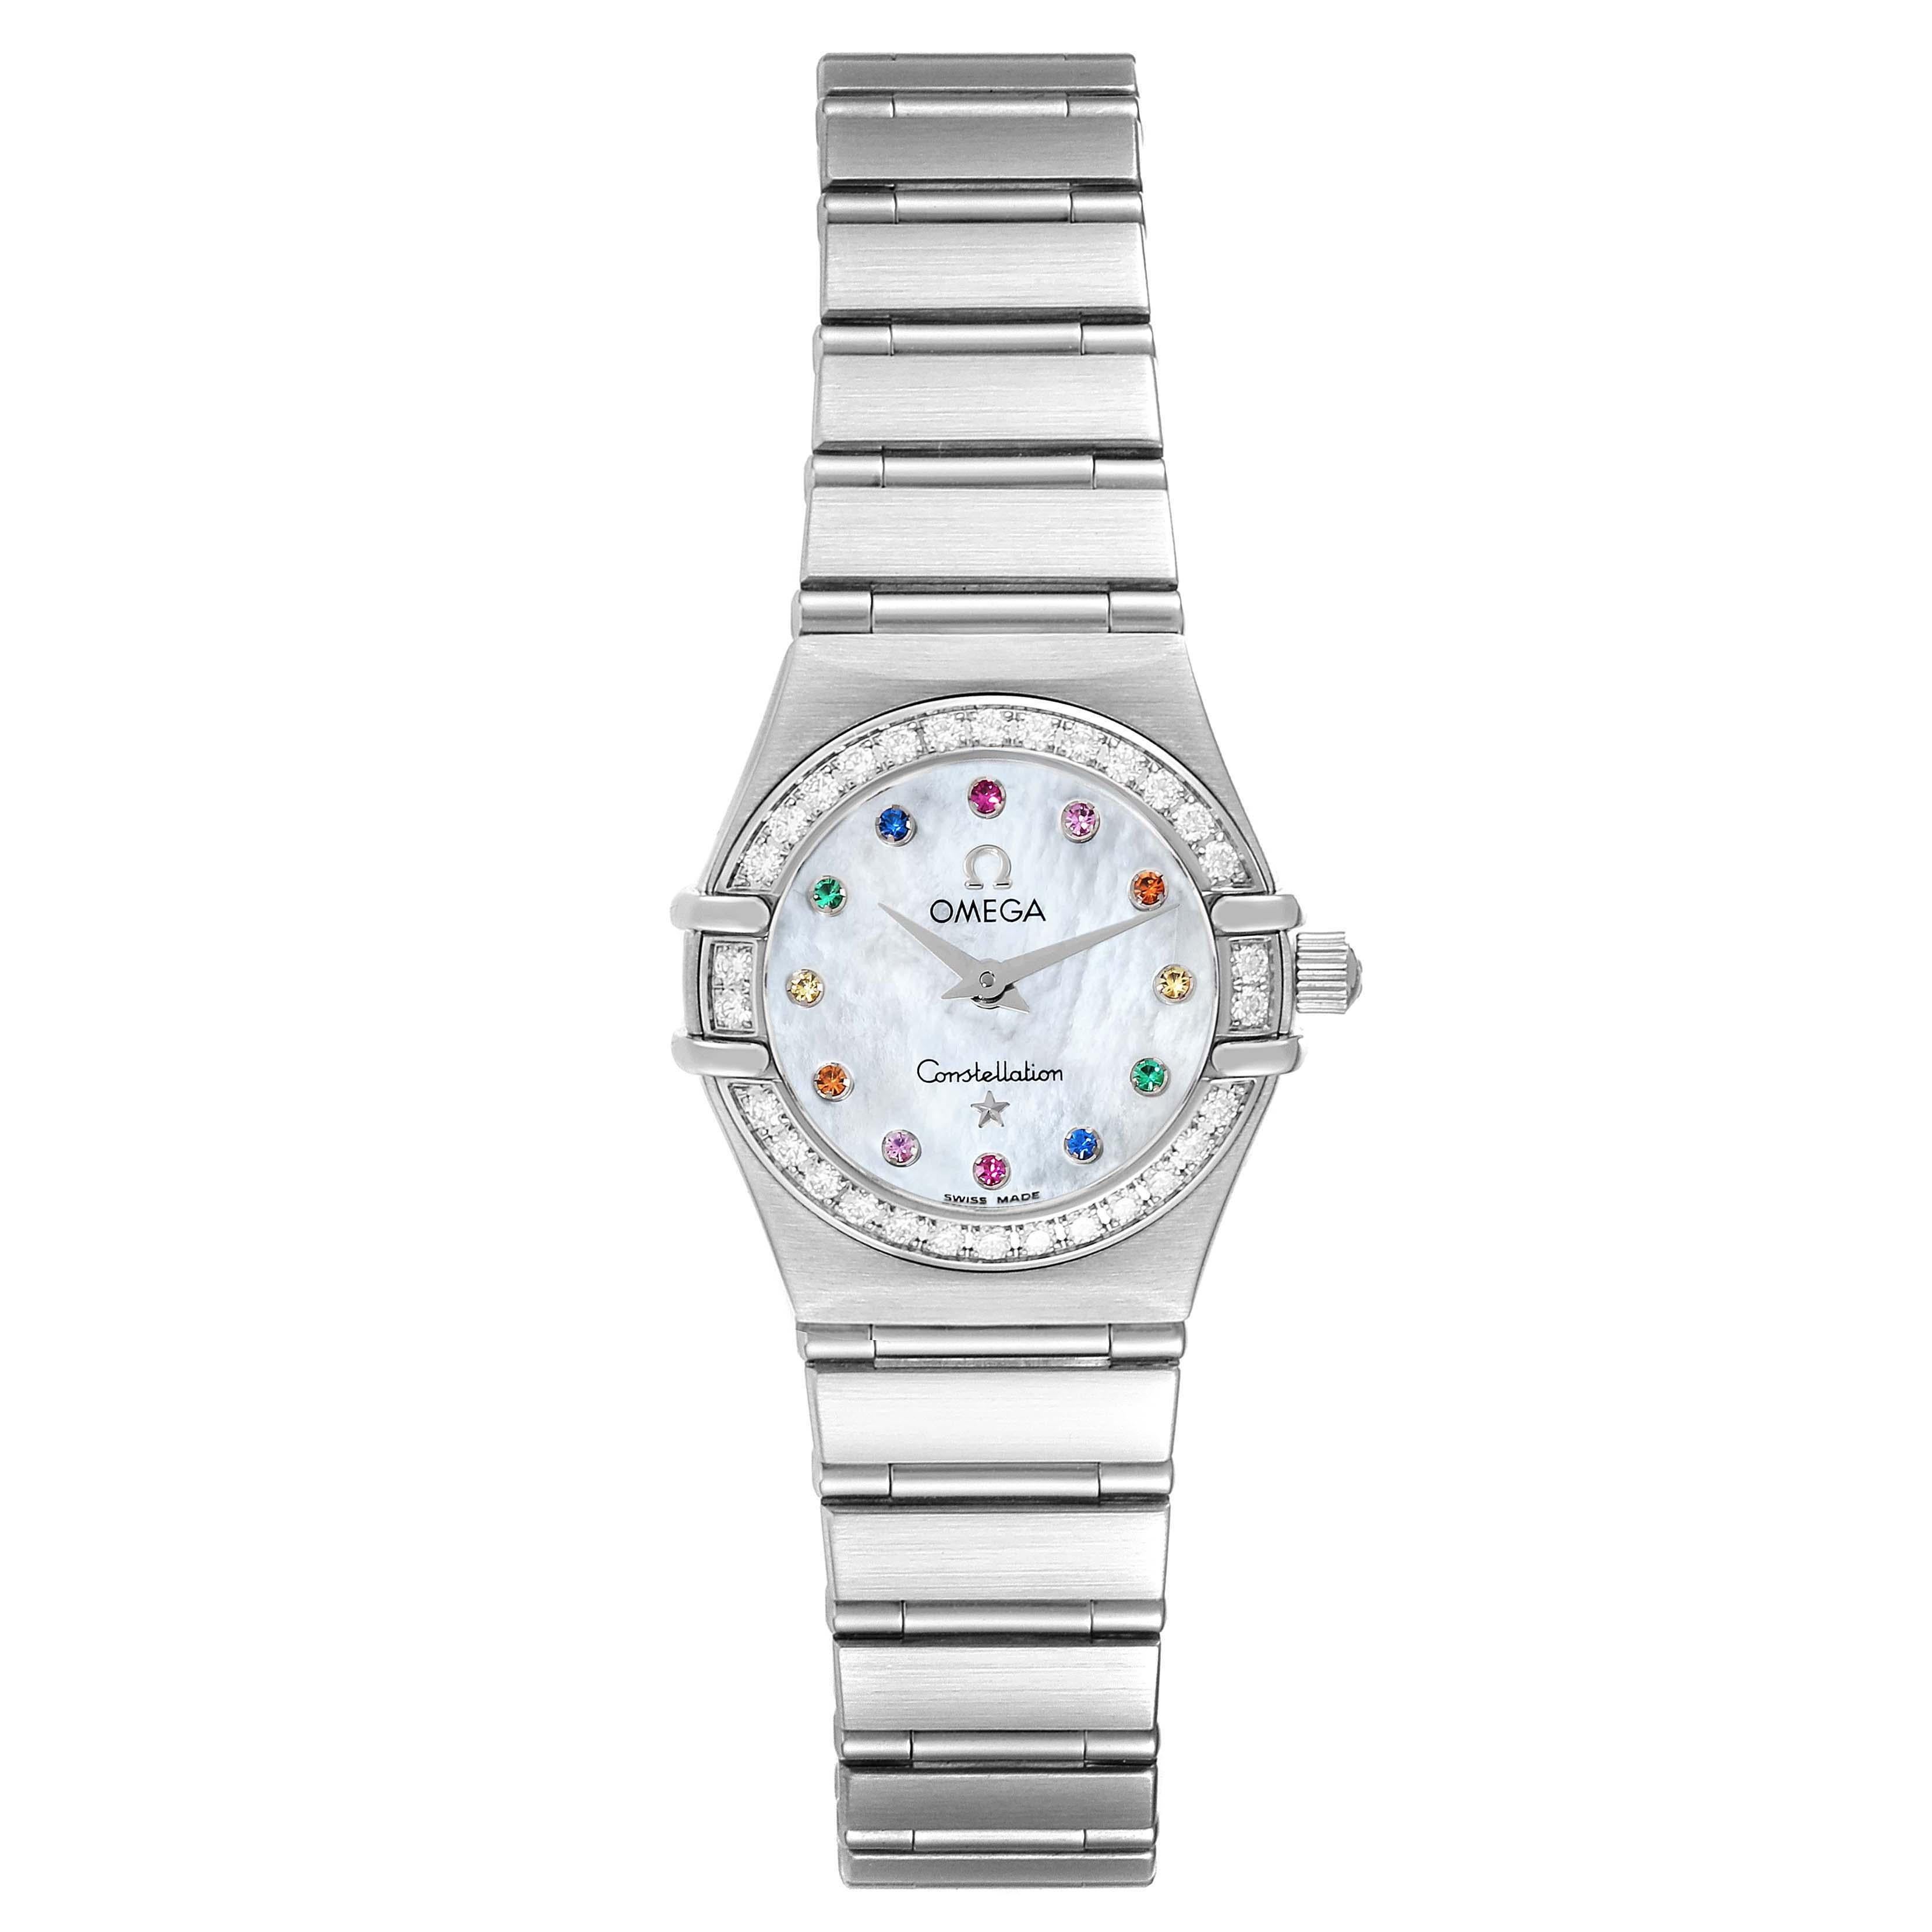 Omega Constellation Iris Steel Multi Stone Mother of Pearl Diamond Ladies Watch 1460.79.00. Quartz movement. Stainless steel round case 22.5 mm in diameter. Original Omega factory diamond bezel. Scratch resistant sapphire crystal. Mother-of-pearl